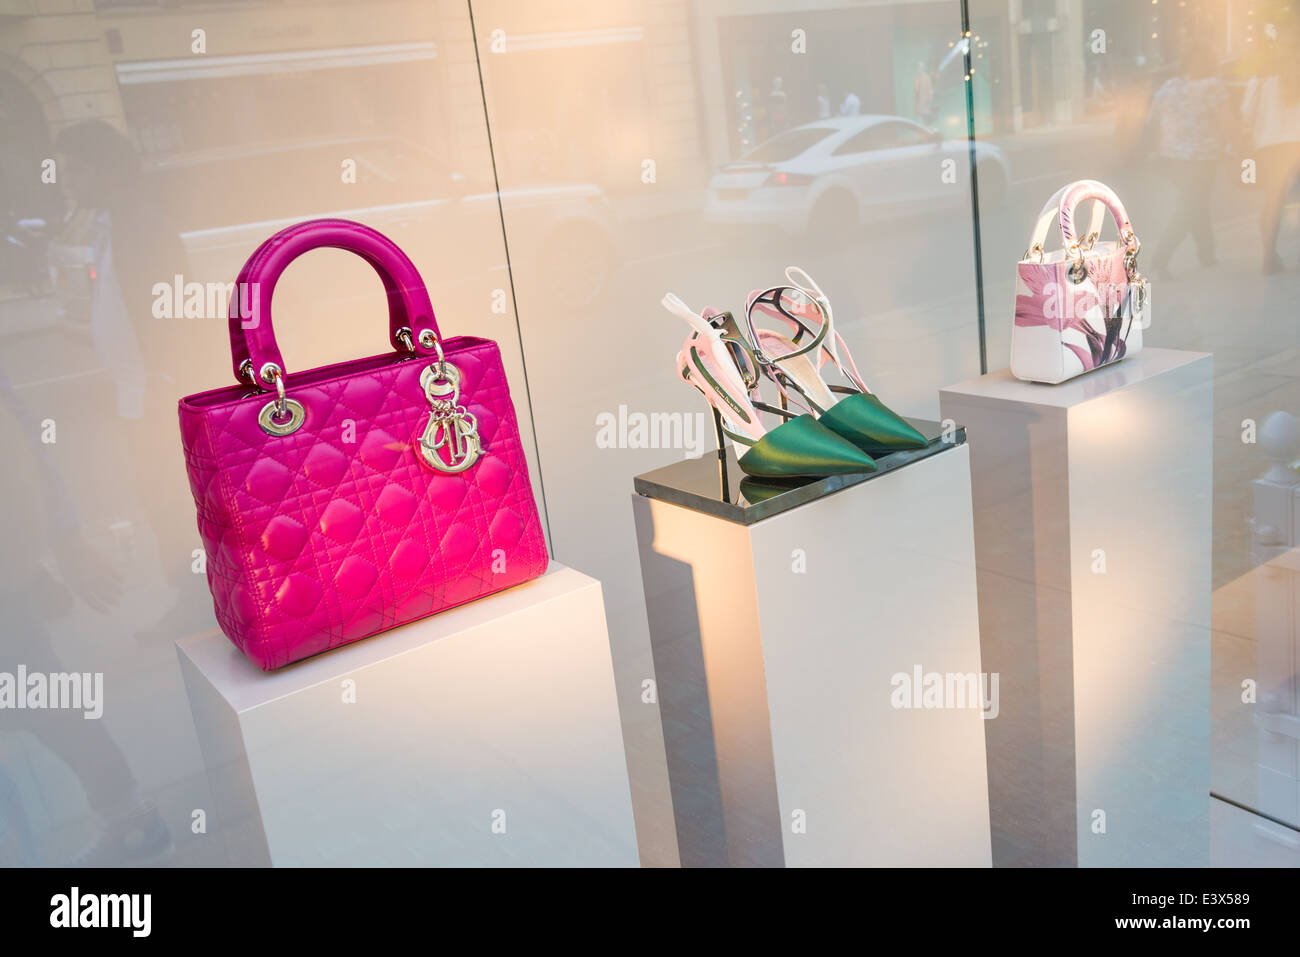 Collection of Handbags on Display at Shopping Center. Stock Photo - Image  of retail, business: 210792592